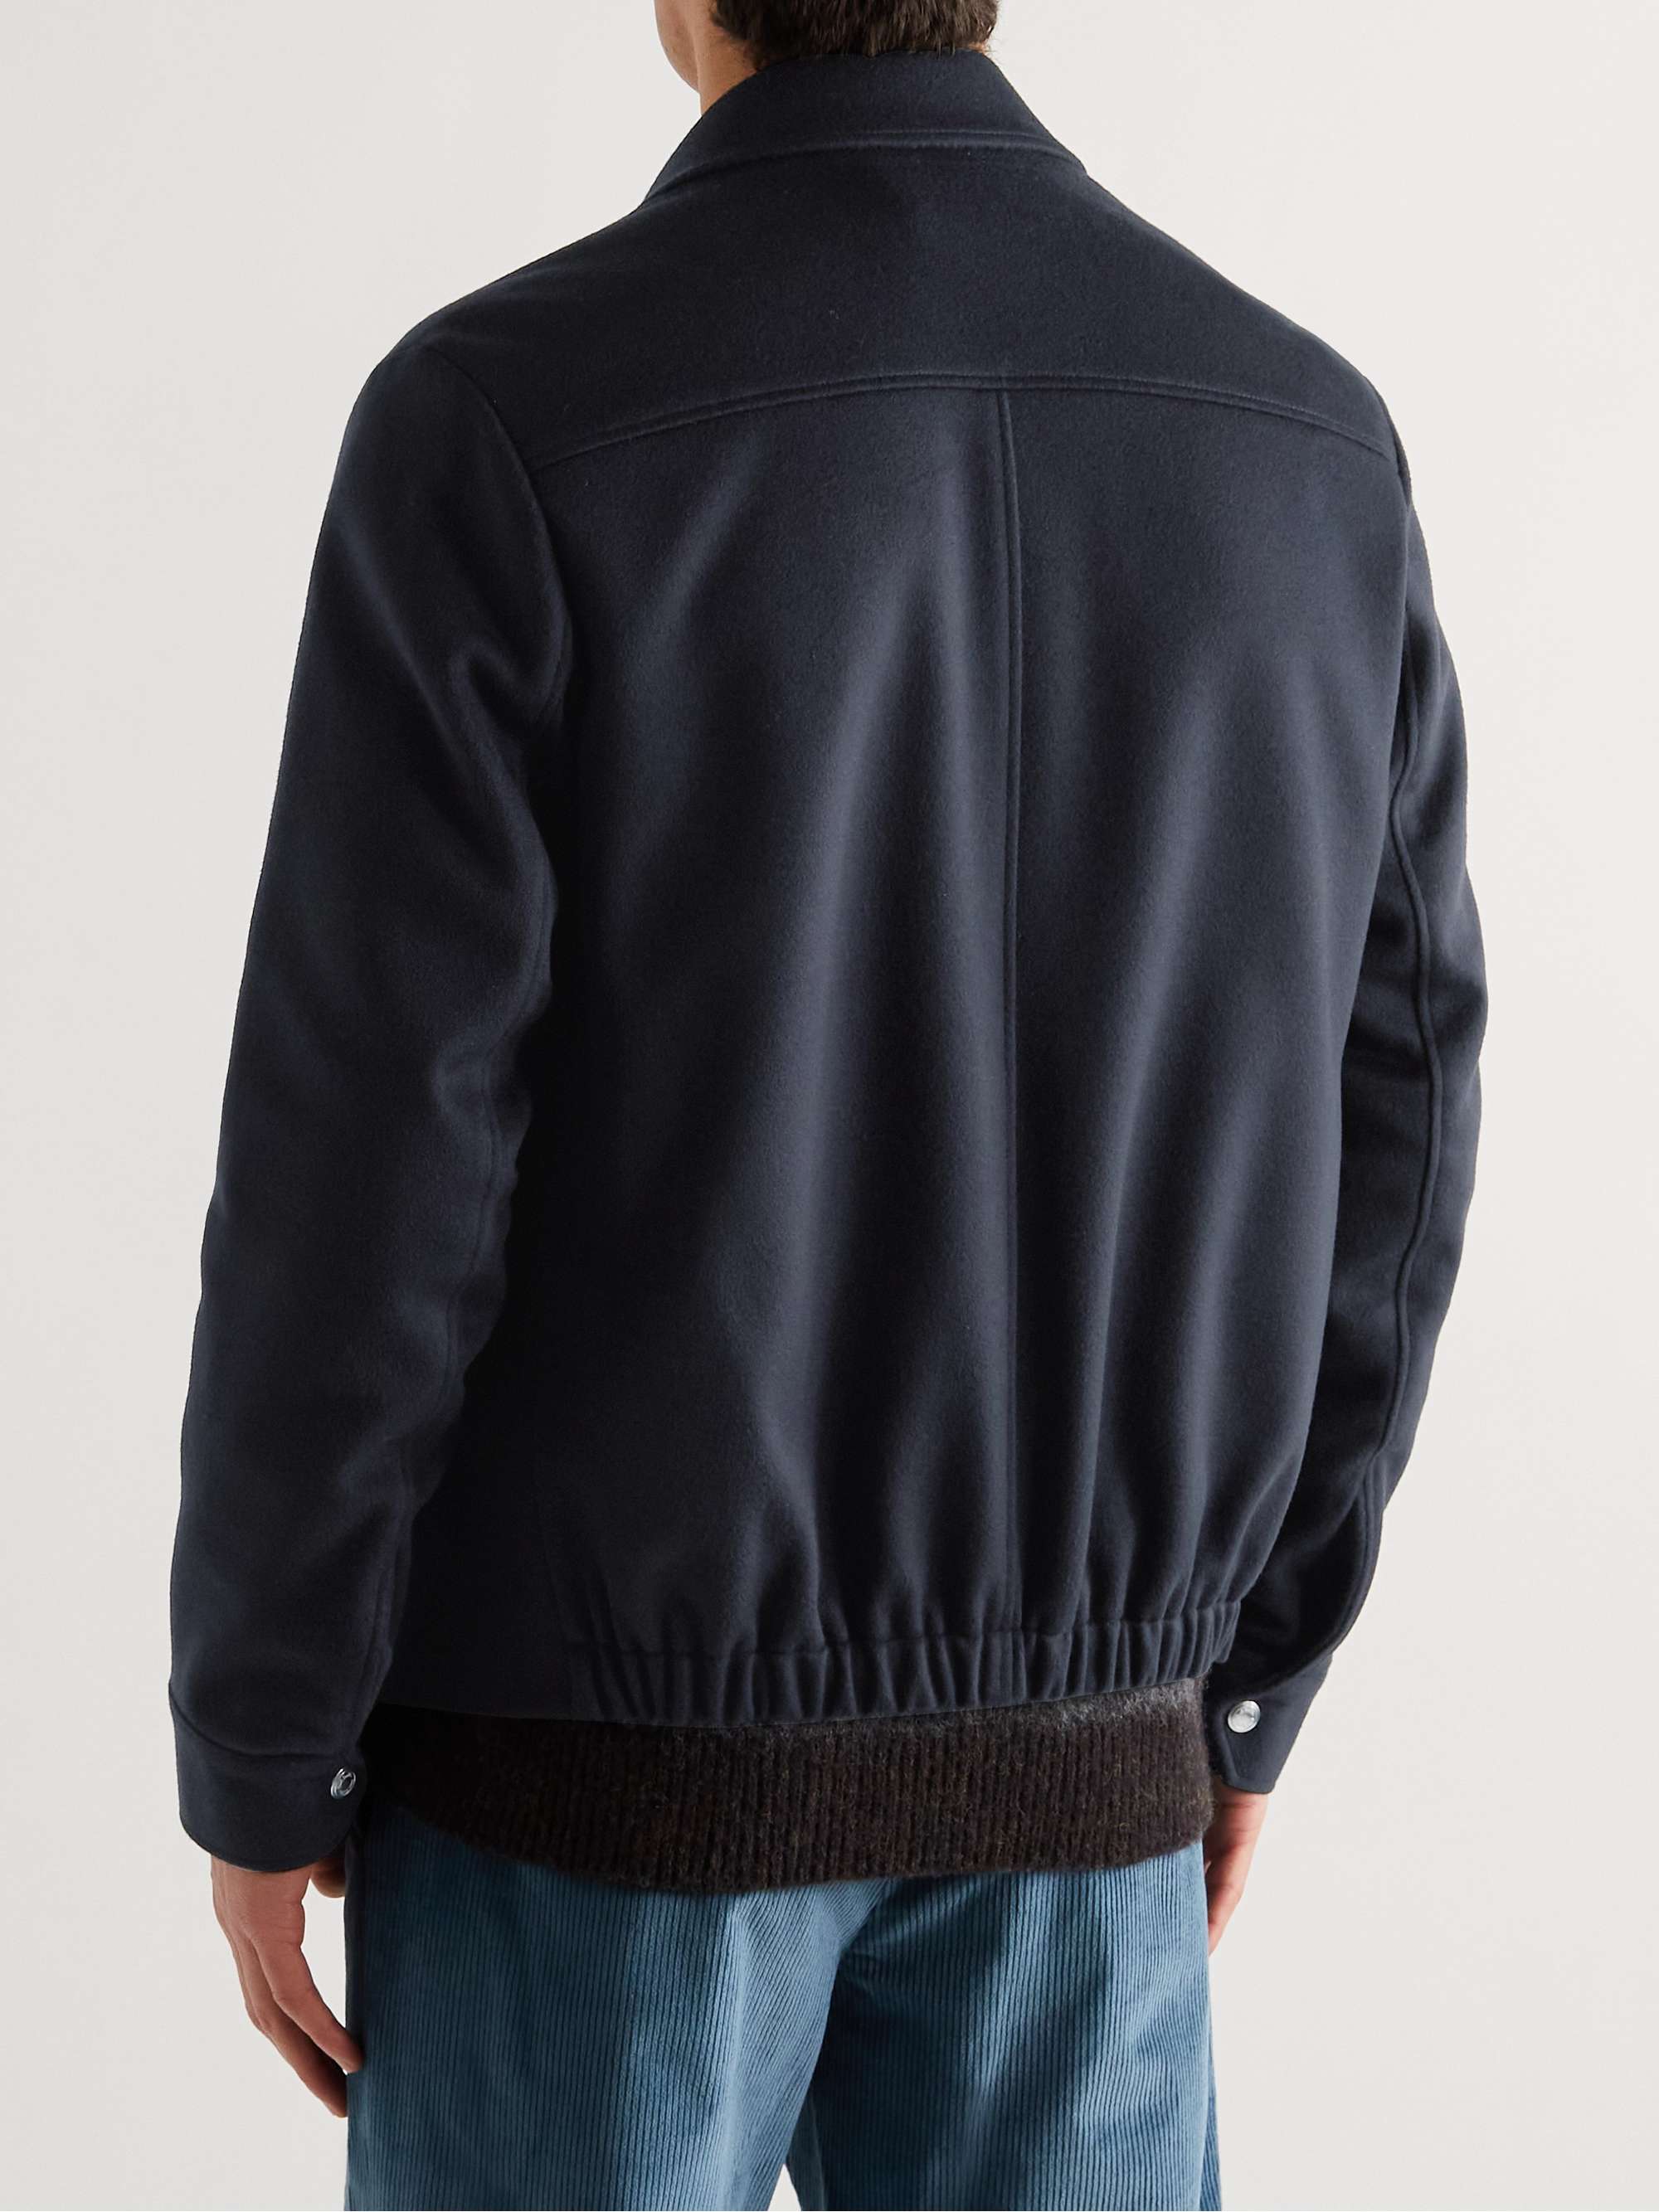 PAUL SMITH Wool and Cashmere-Blend Jacket